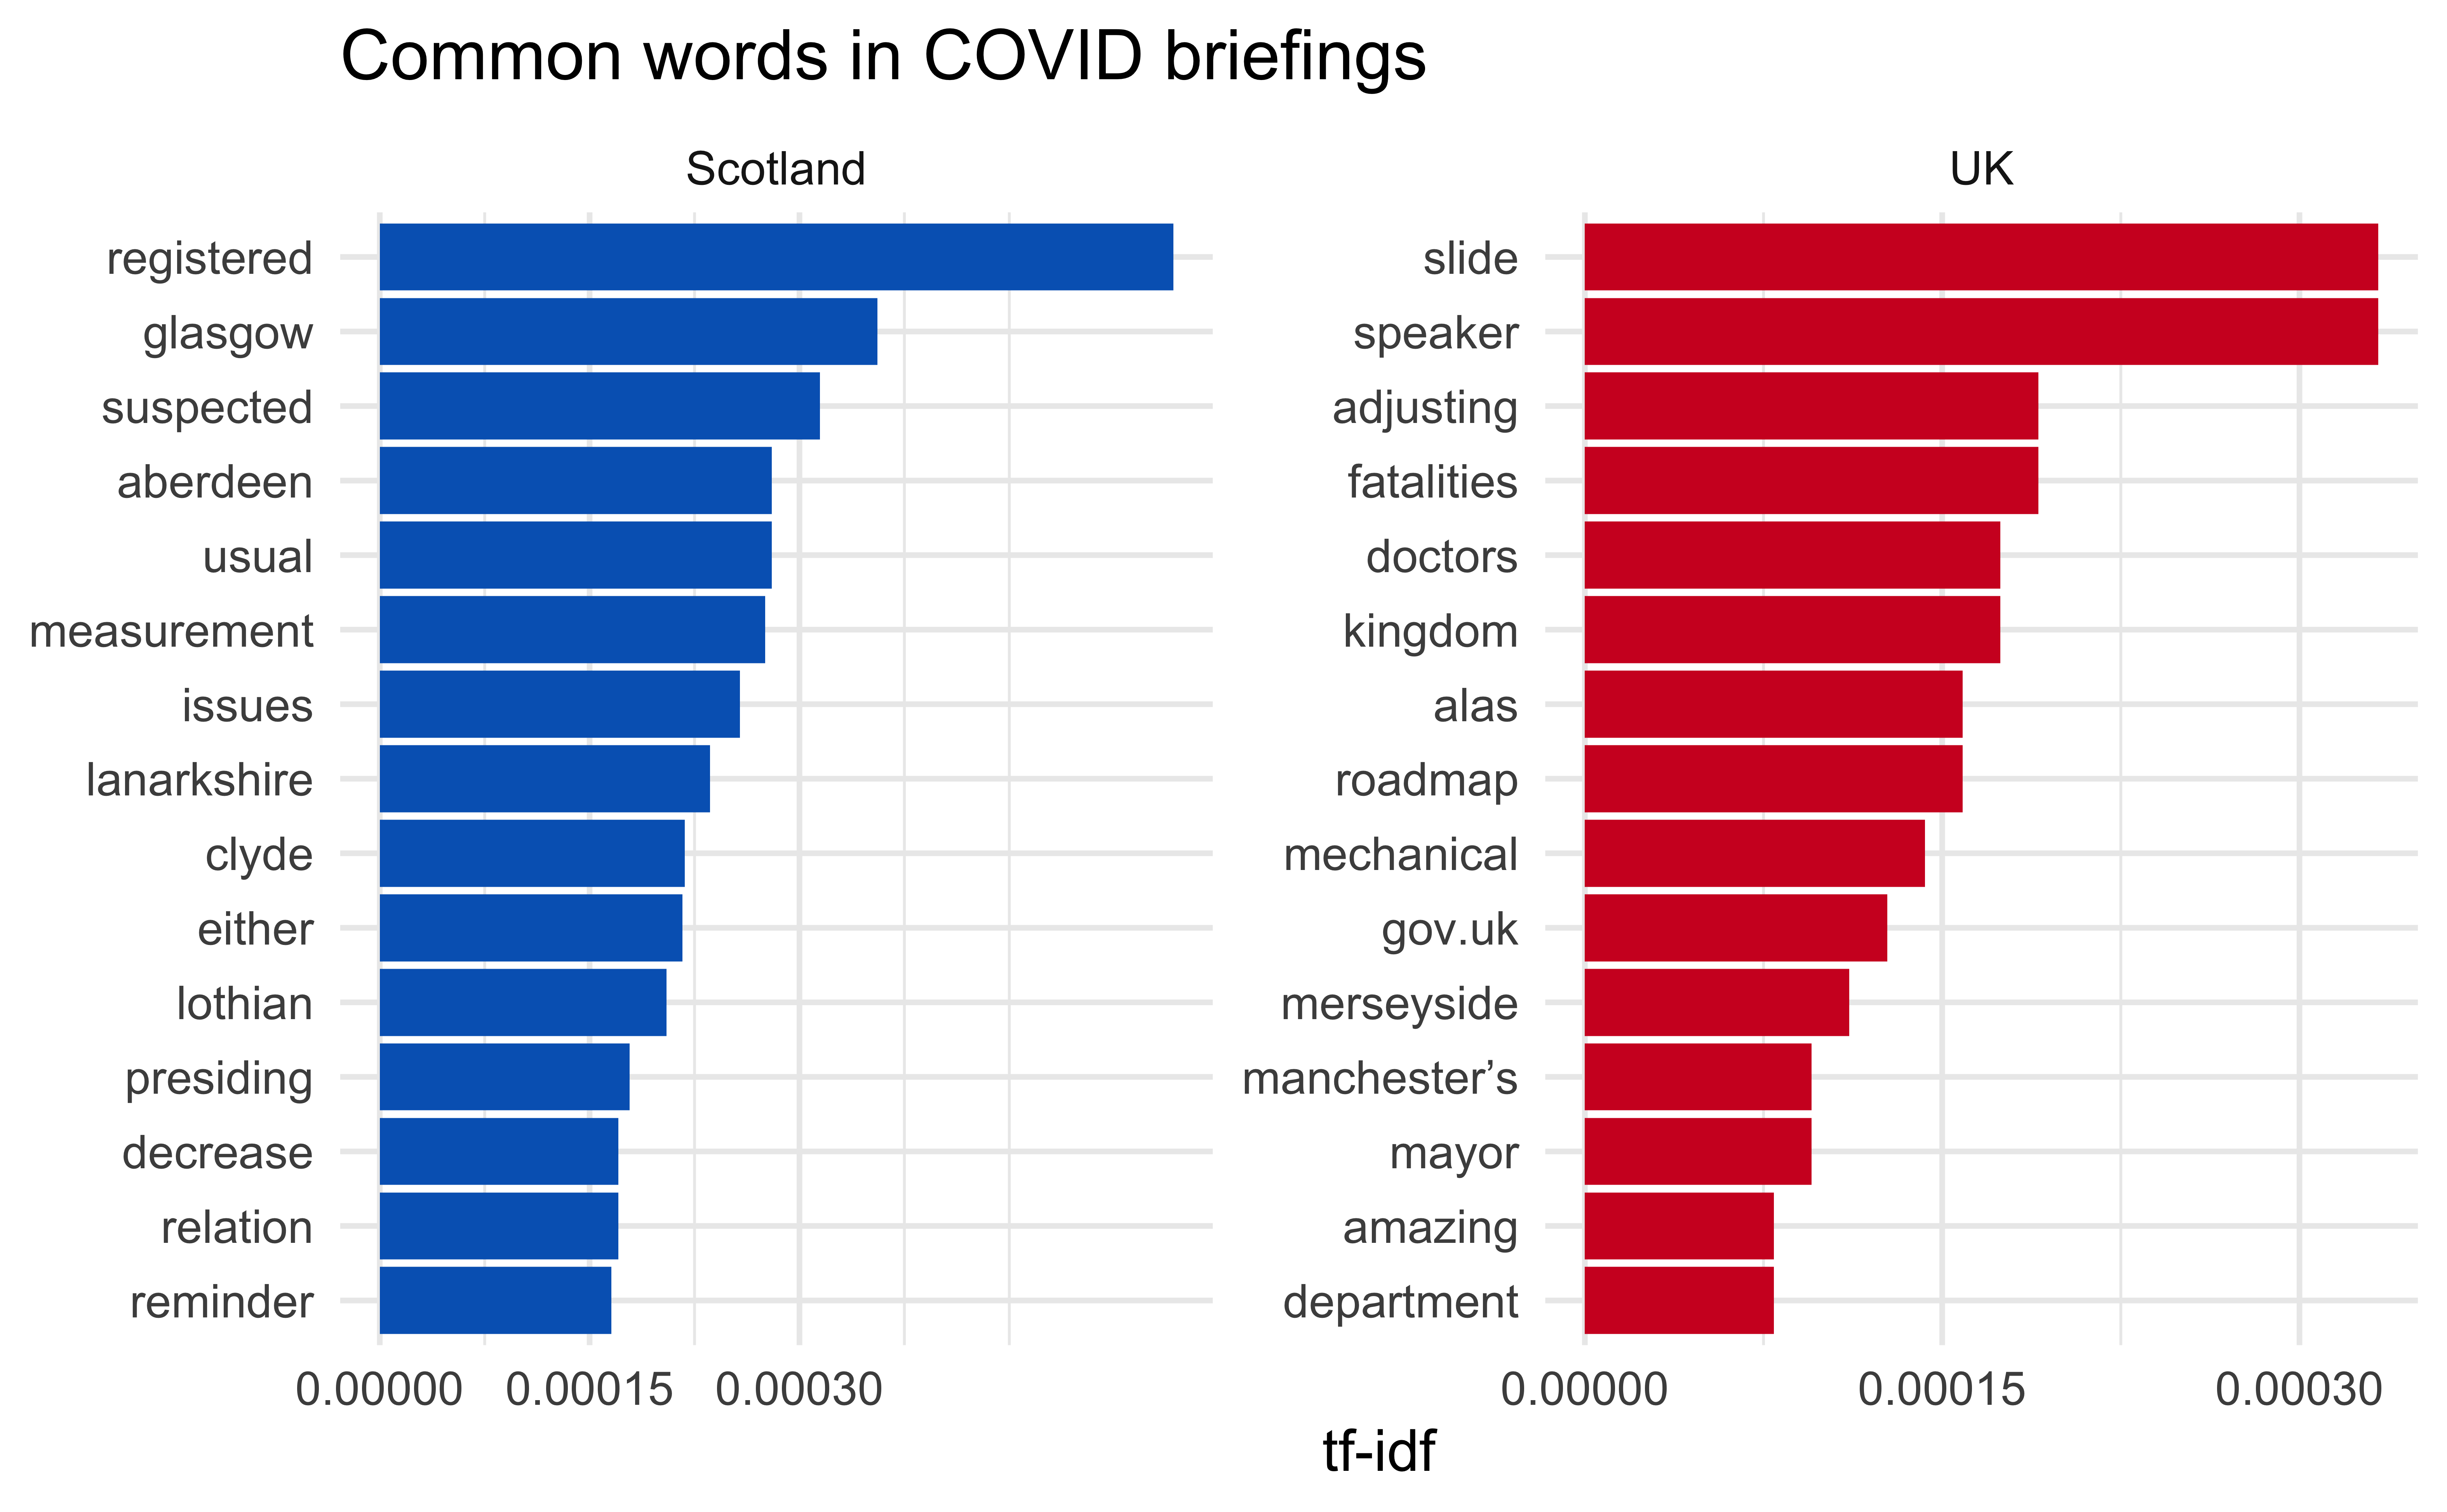 Words with high tf-idf for Scotland speeches are (in decreasing order) registered, Glasgow, suspected, Aberdeen, usual, measurement, issues, Lanarkshire, Clyde, either, Lothian, presiding, decrease, relation, reminder. Words with high tf-idf for UK speeches are (in decreasing order) slide, speaker, adjusting, fatalities, doctors, kingdom, alas, roadmap, mechanical, gov.uk, Merseyside, Mancherter's, mayor, amazing, department 